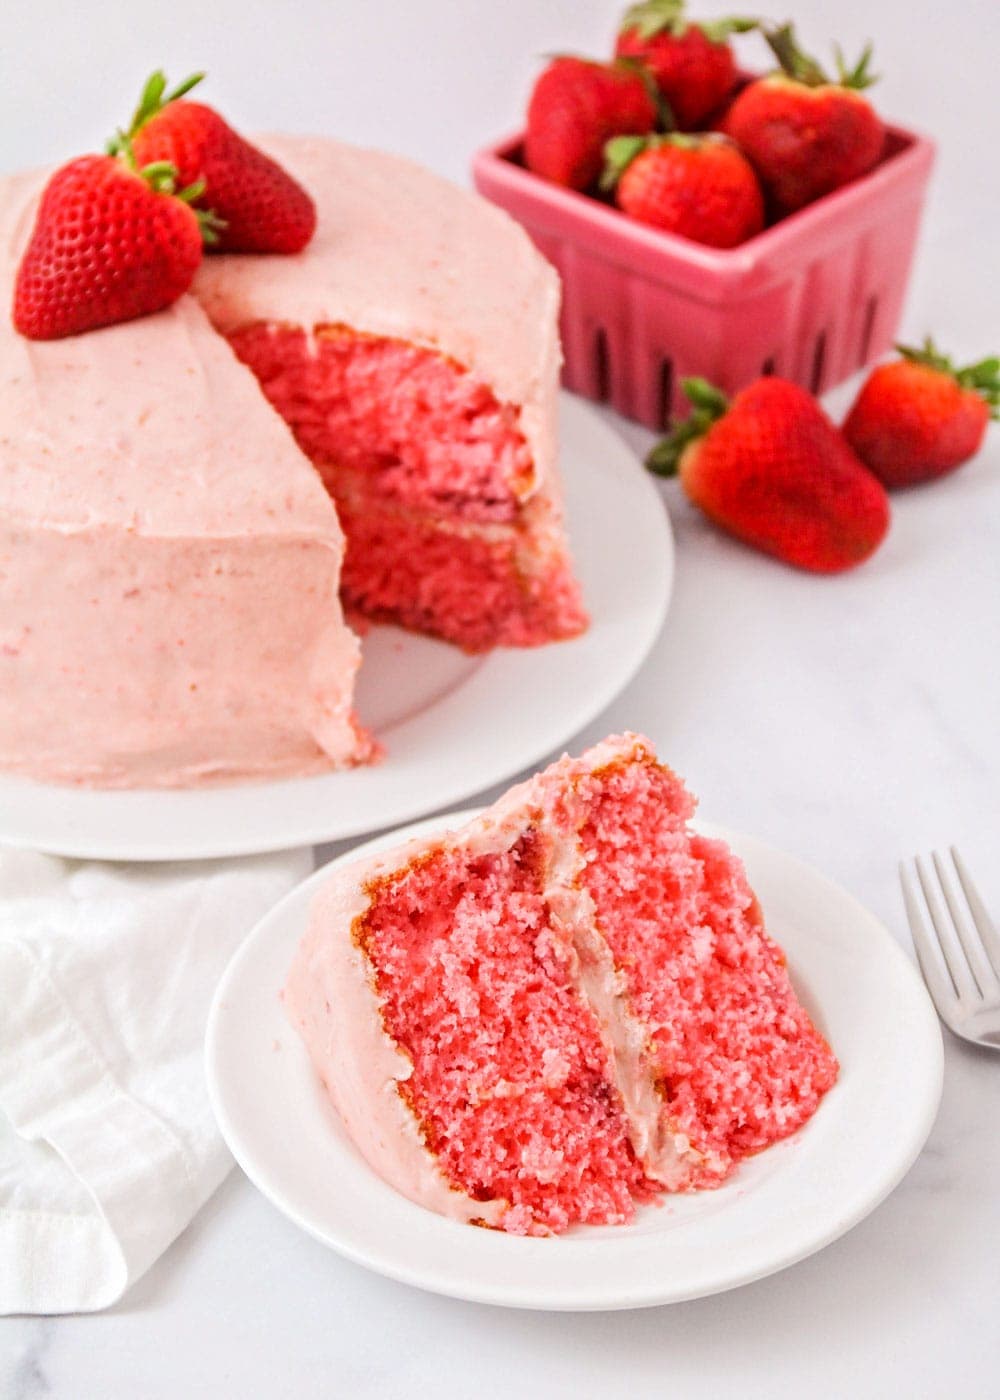 A slice of homemade strawberry cake on a white plate